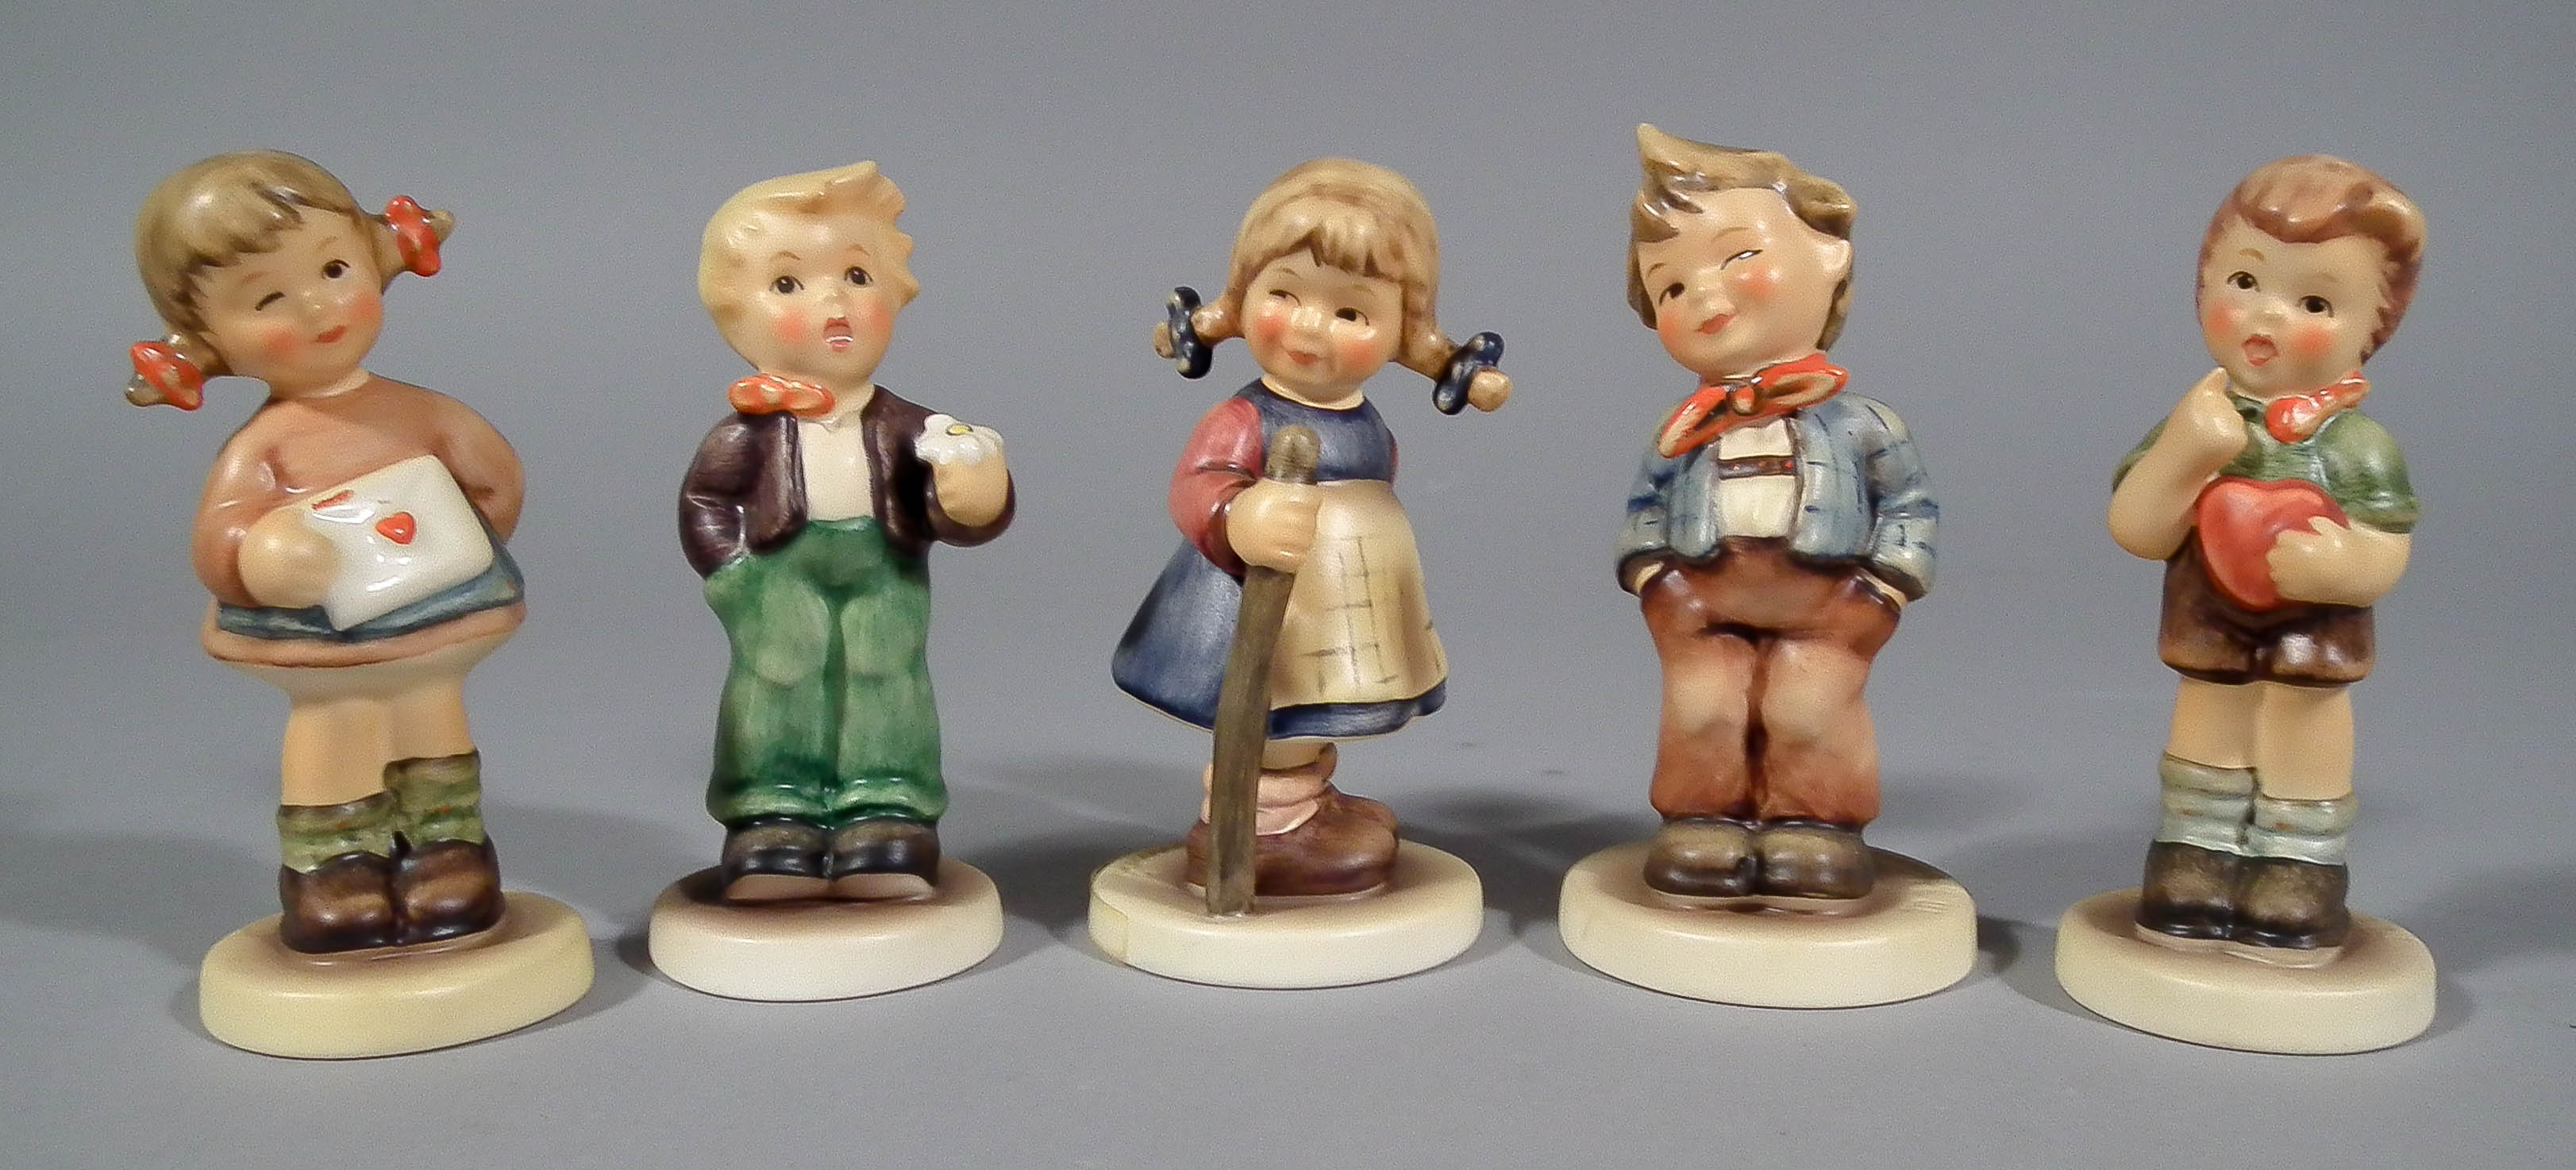 Five Hummel pottery - "A Flower for You", 3ins high, "Pixie", 3.5ins high, "Scamp",